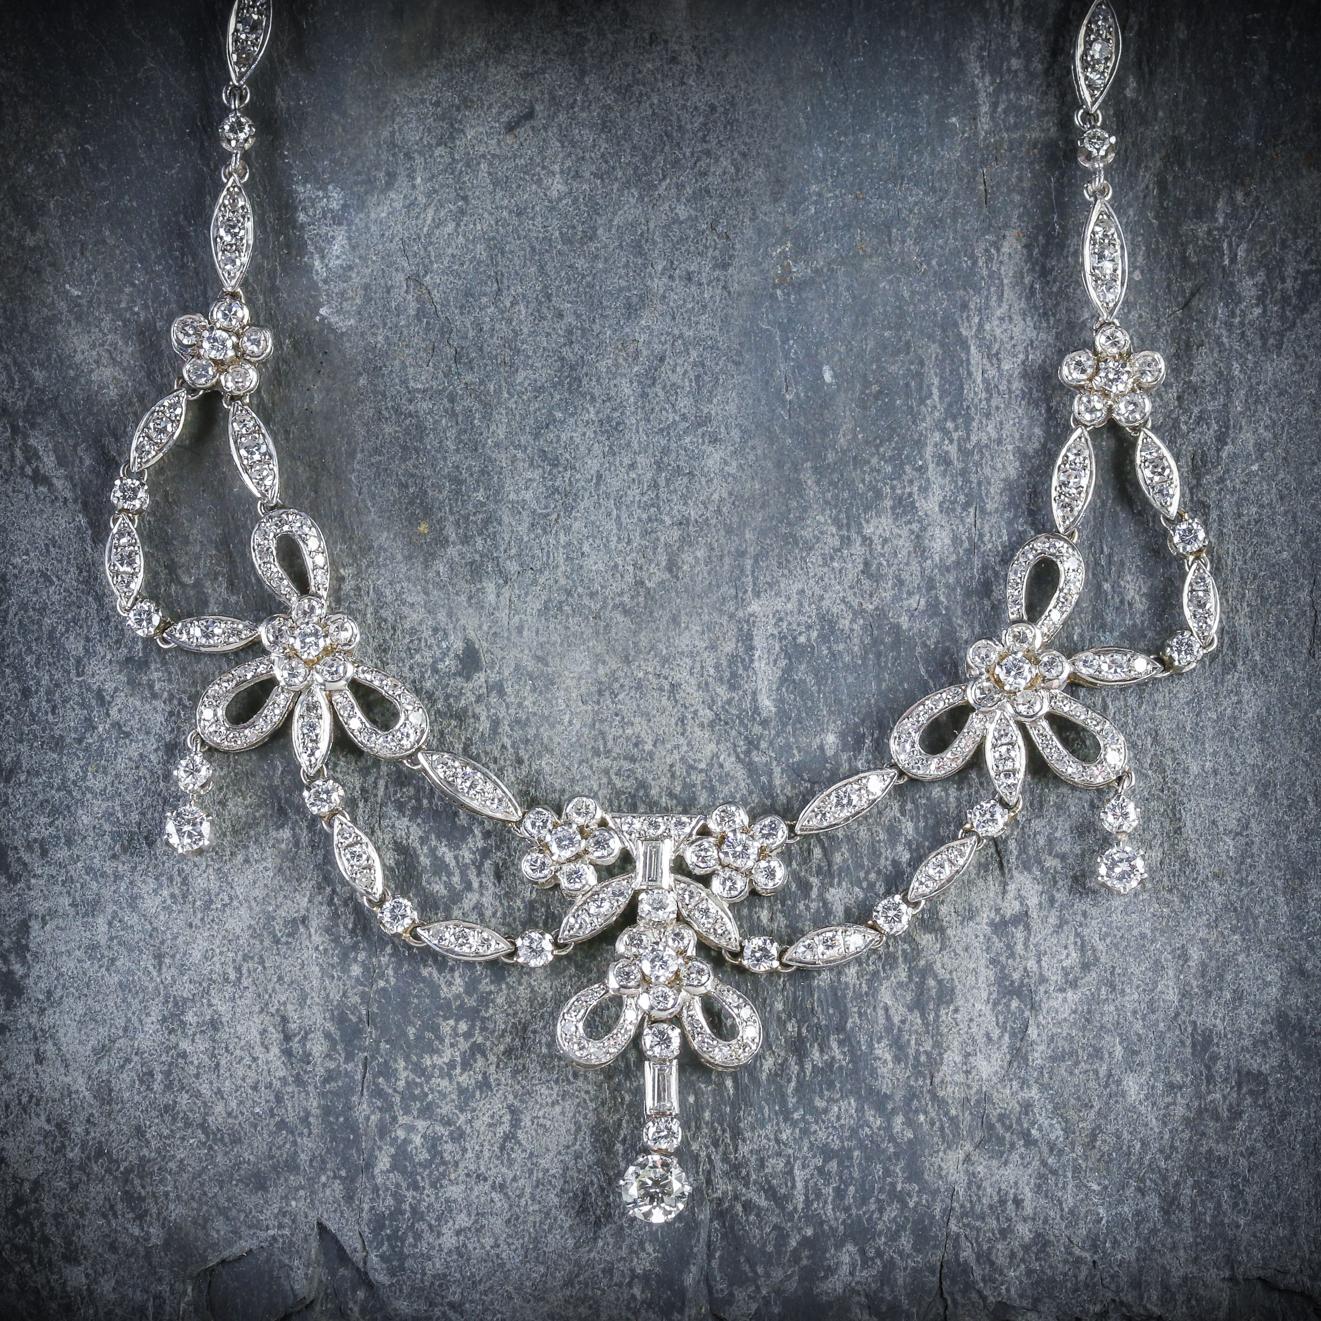 This stunning antique Platinum Diamond necklace is Edwardian, Circa 1910

The piece is adorned with sparkling old cut and baguette cut Diamonds set in a lovely setting decorated with flower motifs and Diamond droppers 

There are 17.50cts worth of